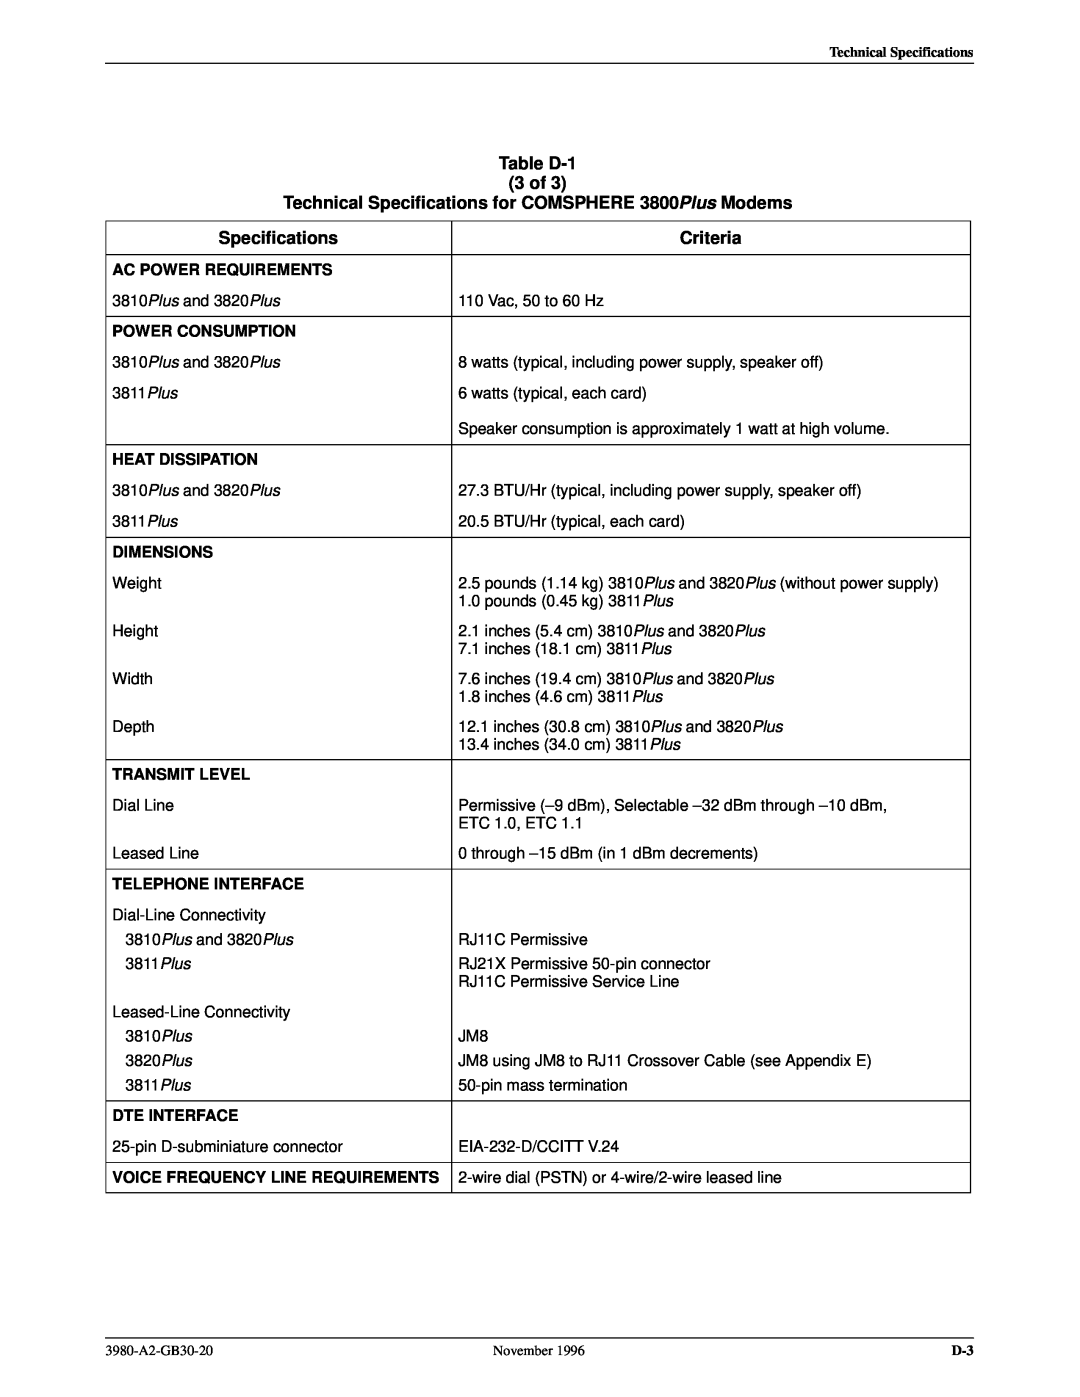 Paradyne 3800PLUS Table D-1 3 of Technical Specifications for COMSPHERE 3800Plus Modems, Criteria, Ac Power Requirements 